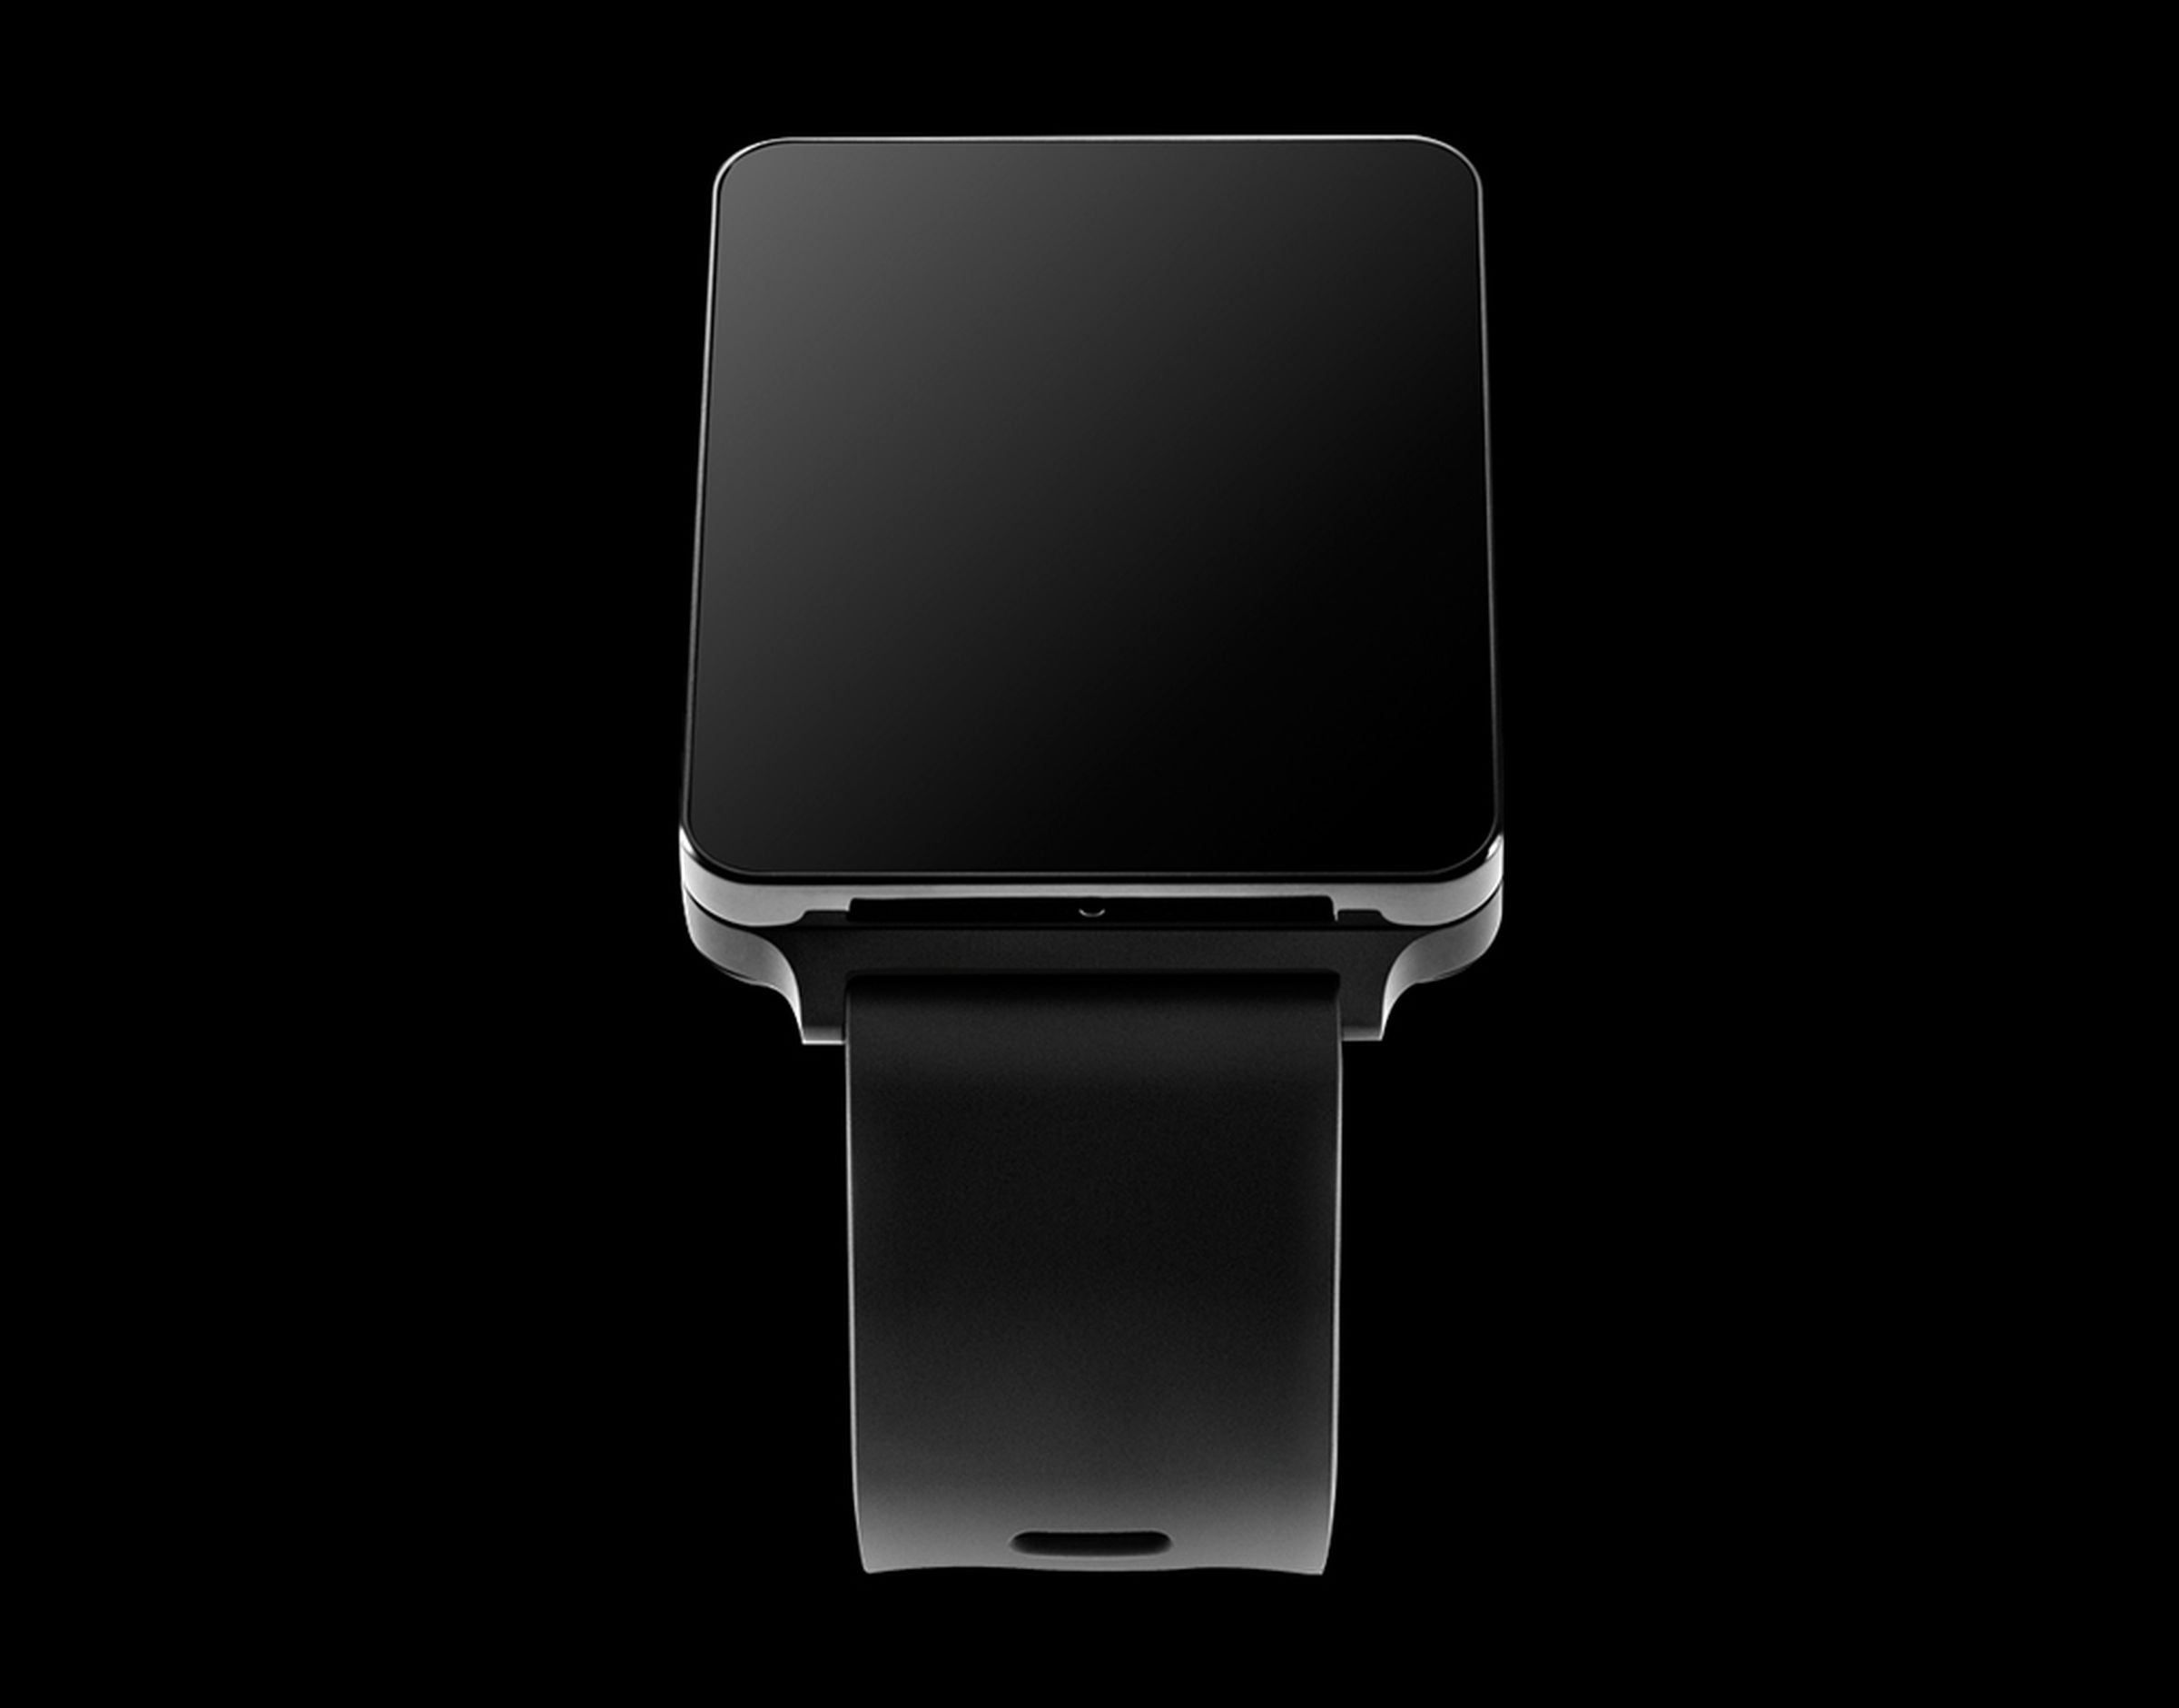 LG G Watch pictures